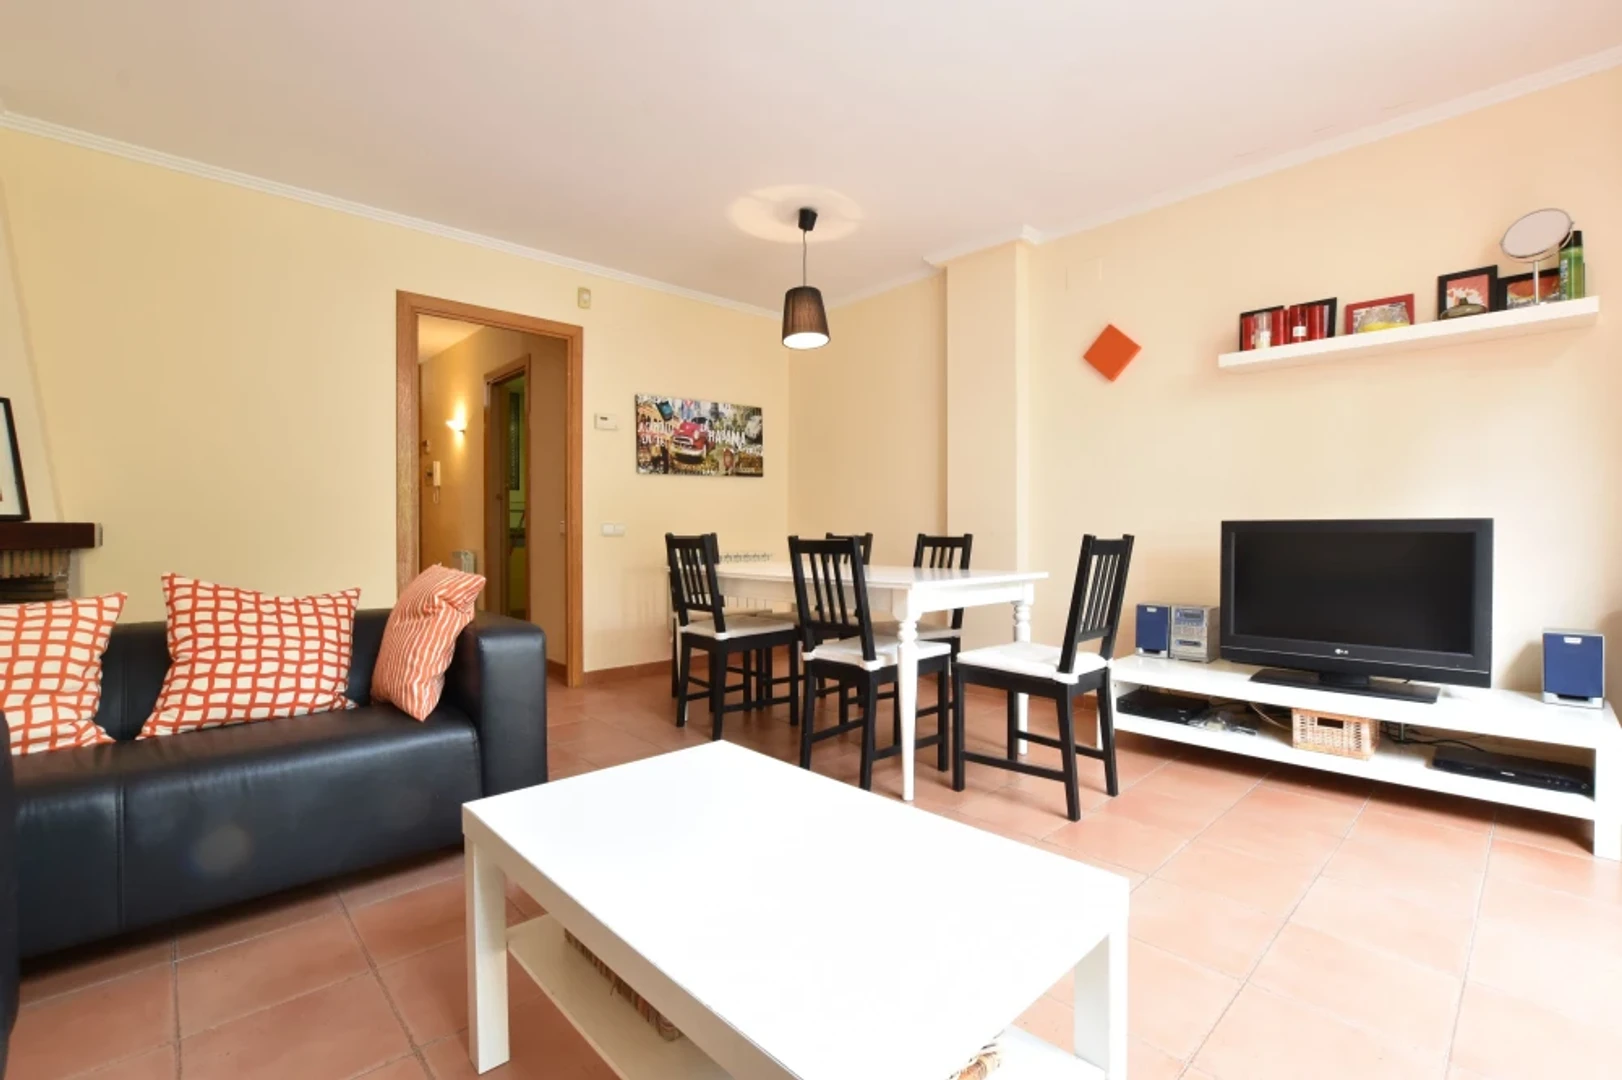 Accommodation in the centre of Tarragona